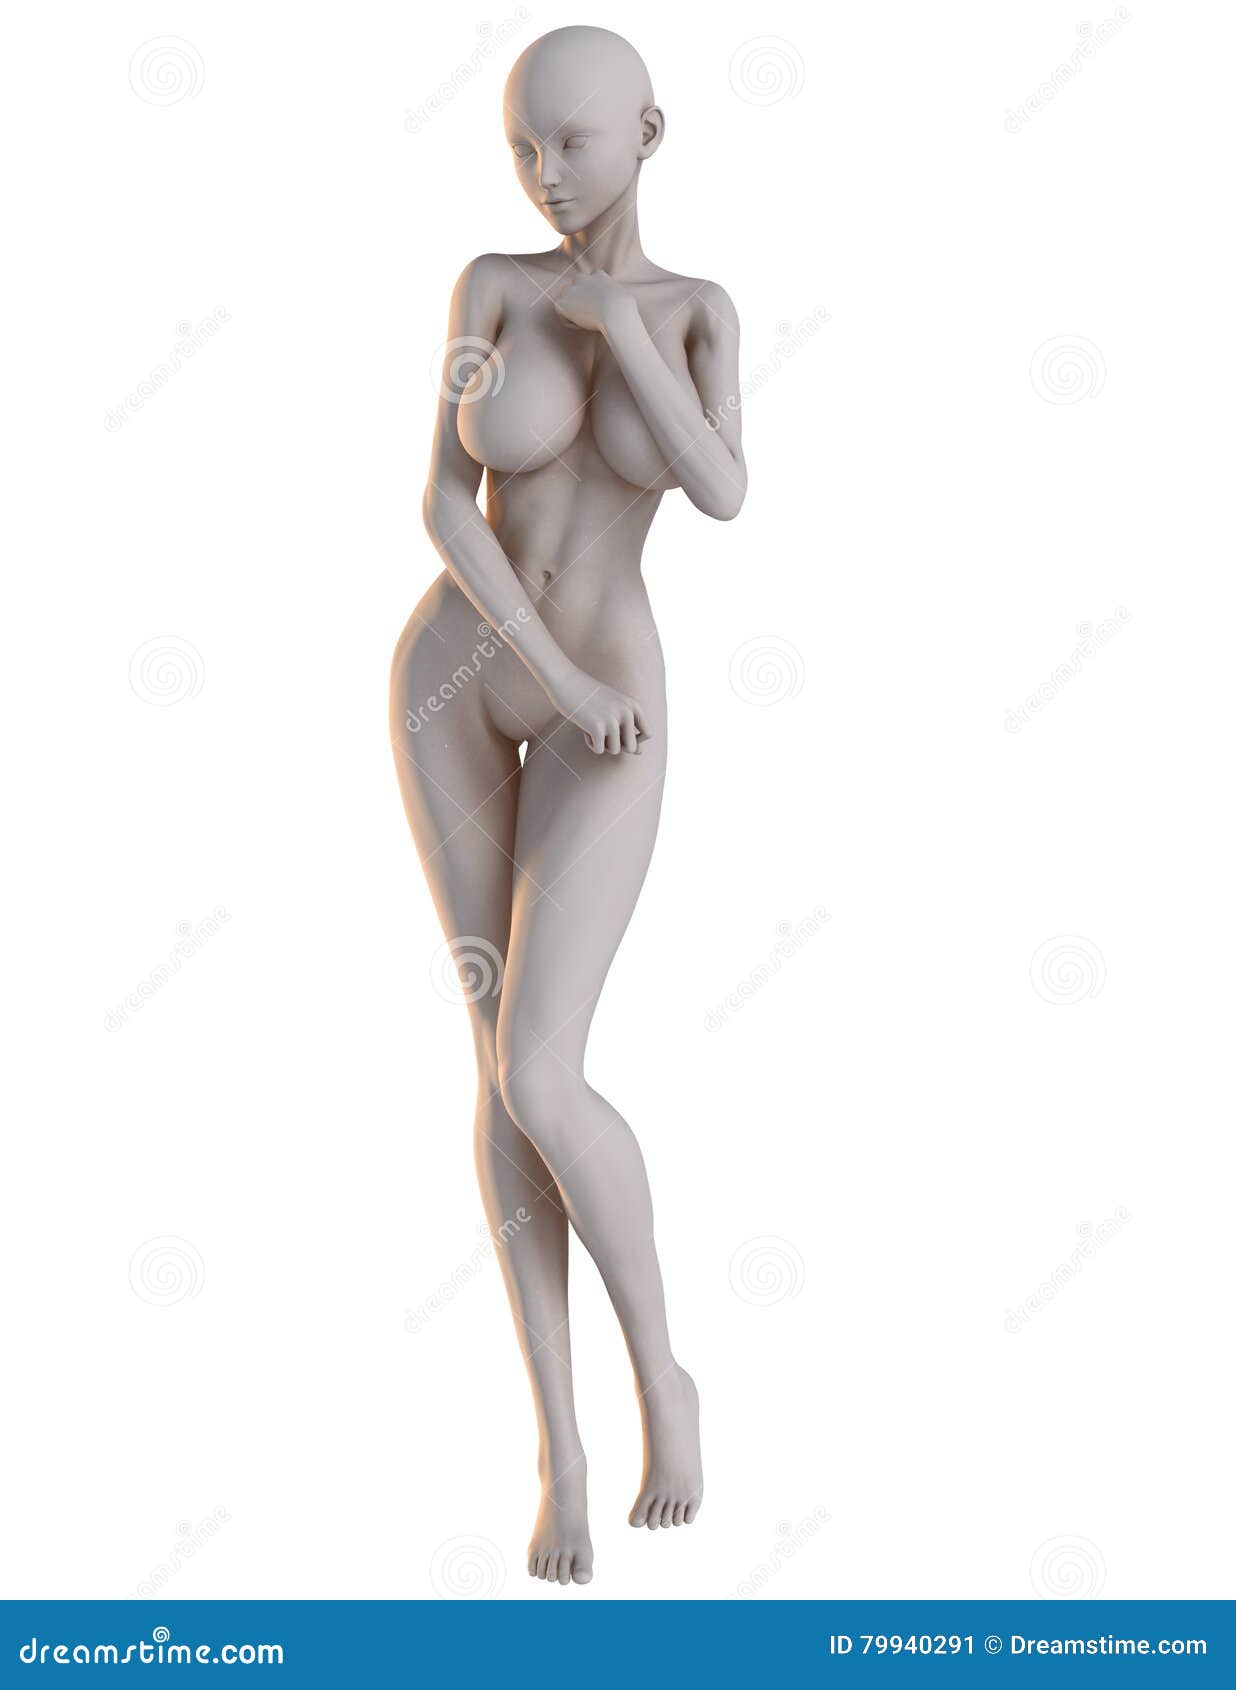 11,606 Anime Girl Poses Images, Stock Photos, 3D objects, & Vectors